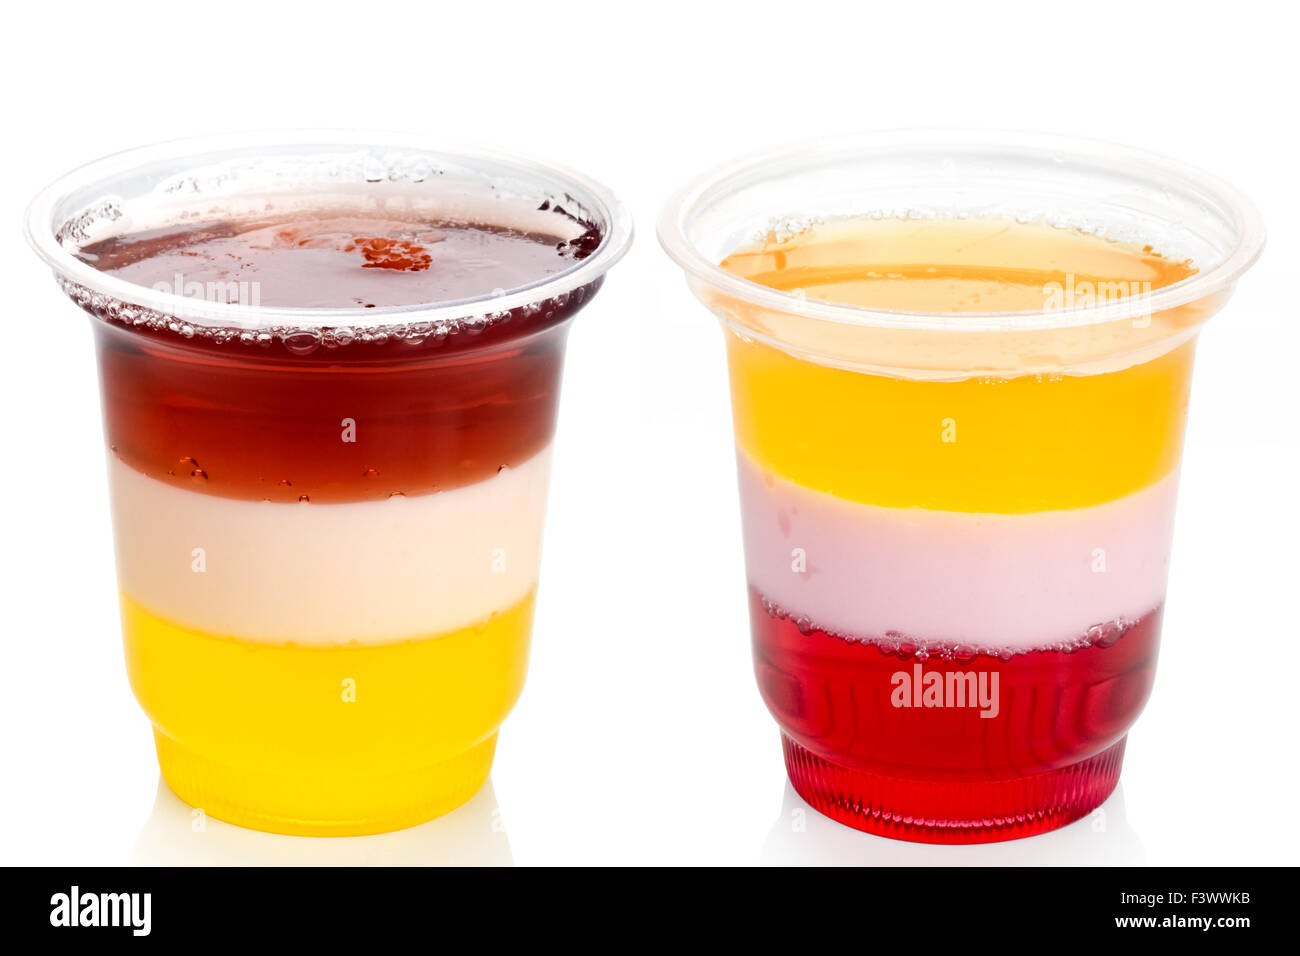 two cups of a colored jelly desserts Stock Photo